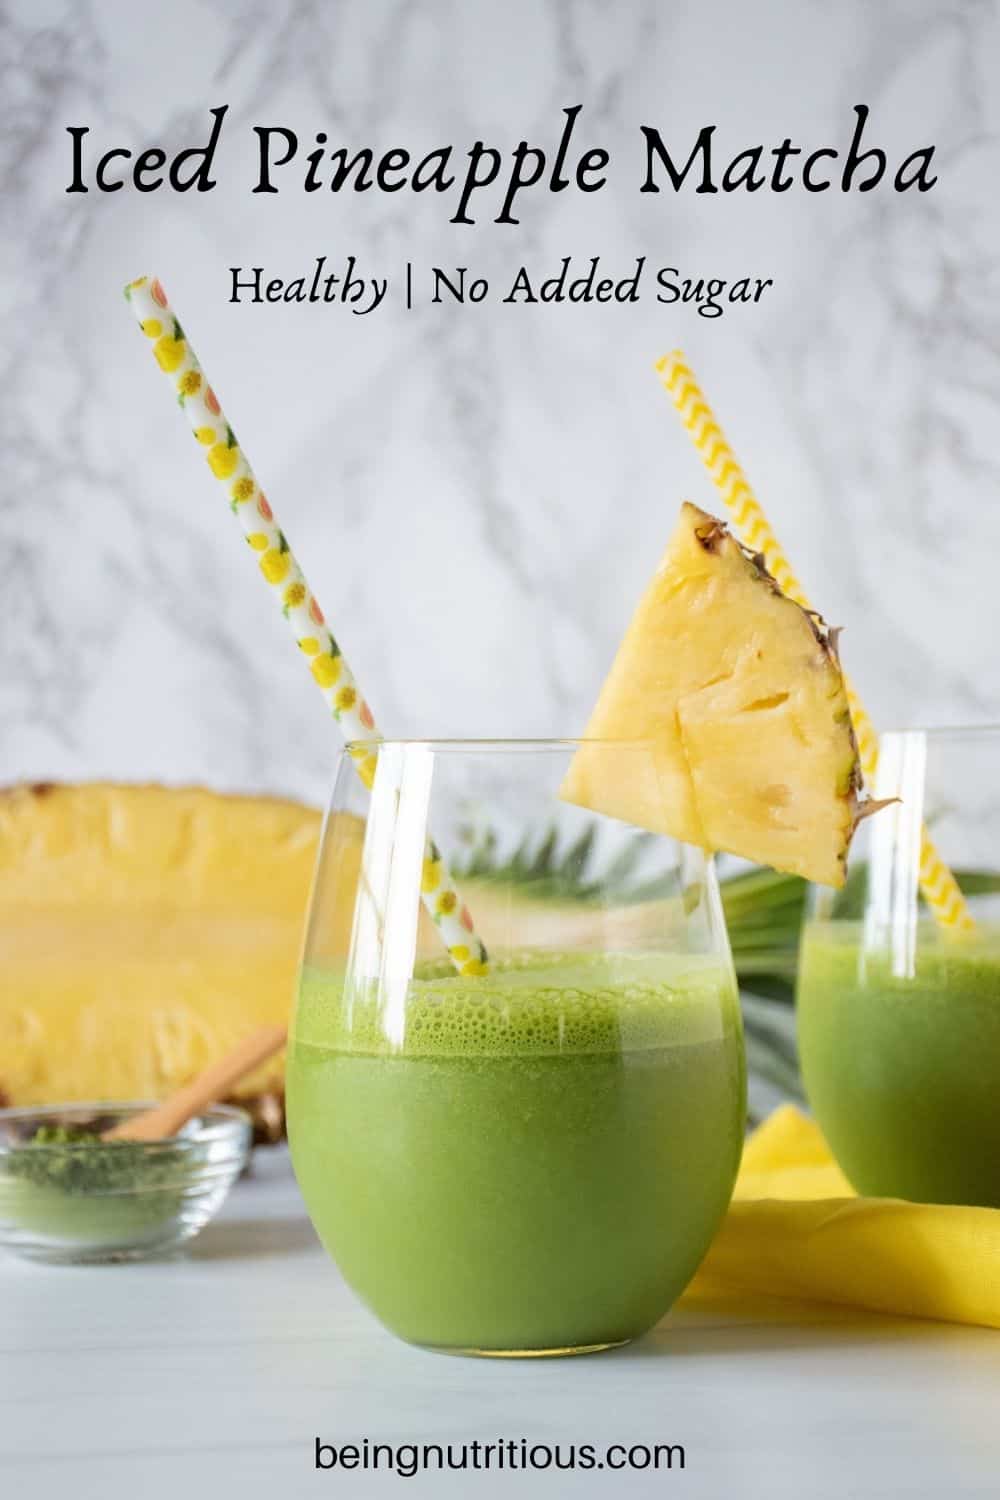 Glass of iced matcha drink, garnished with a pineapple slice. Text overlay: Iced Pineapple Matcha; healthy, no added sugar.